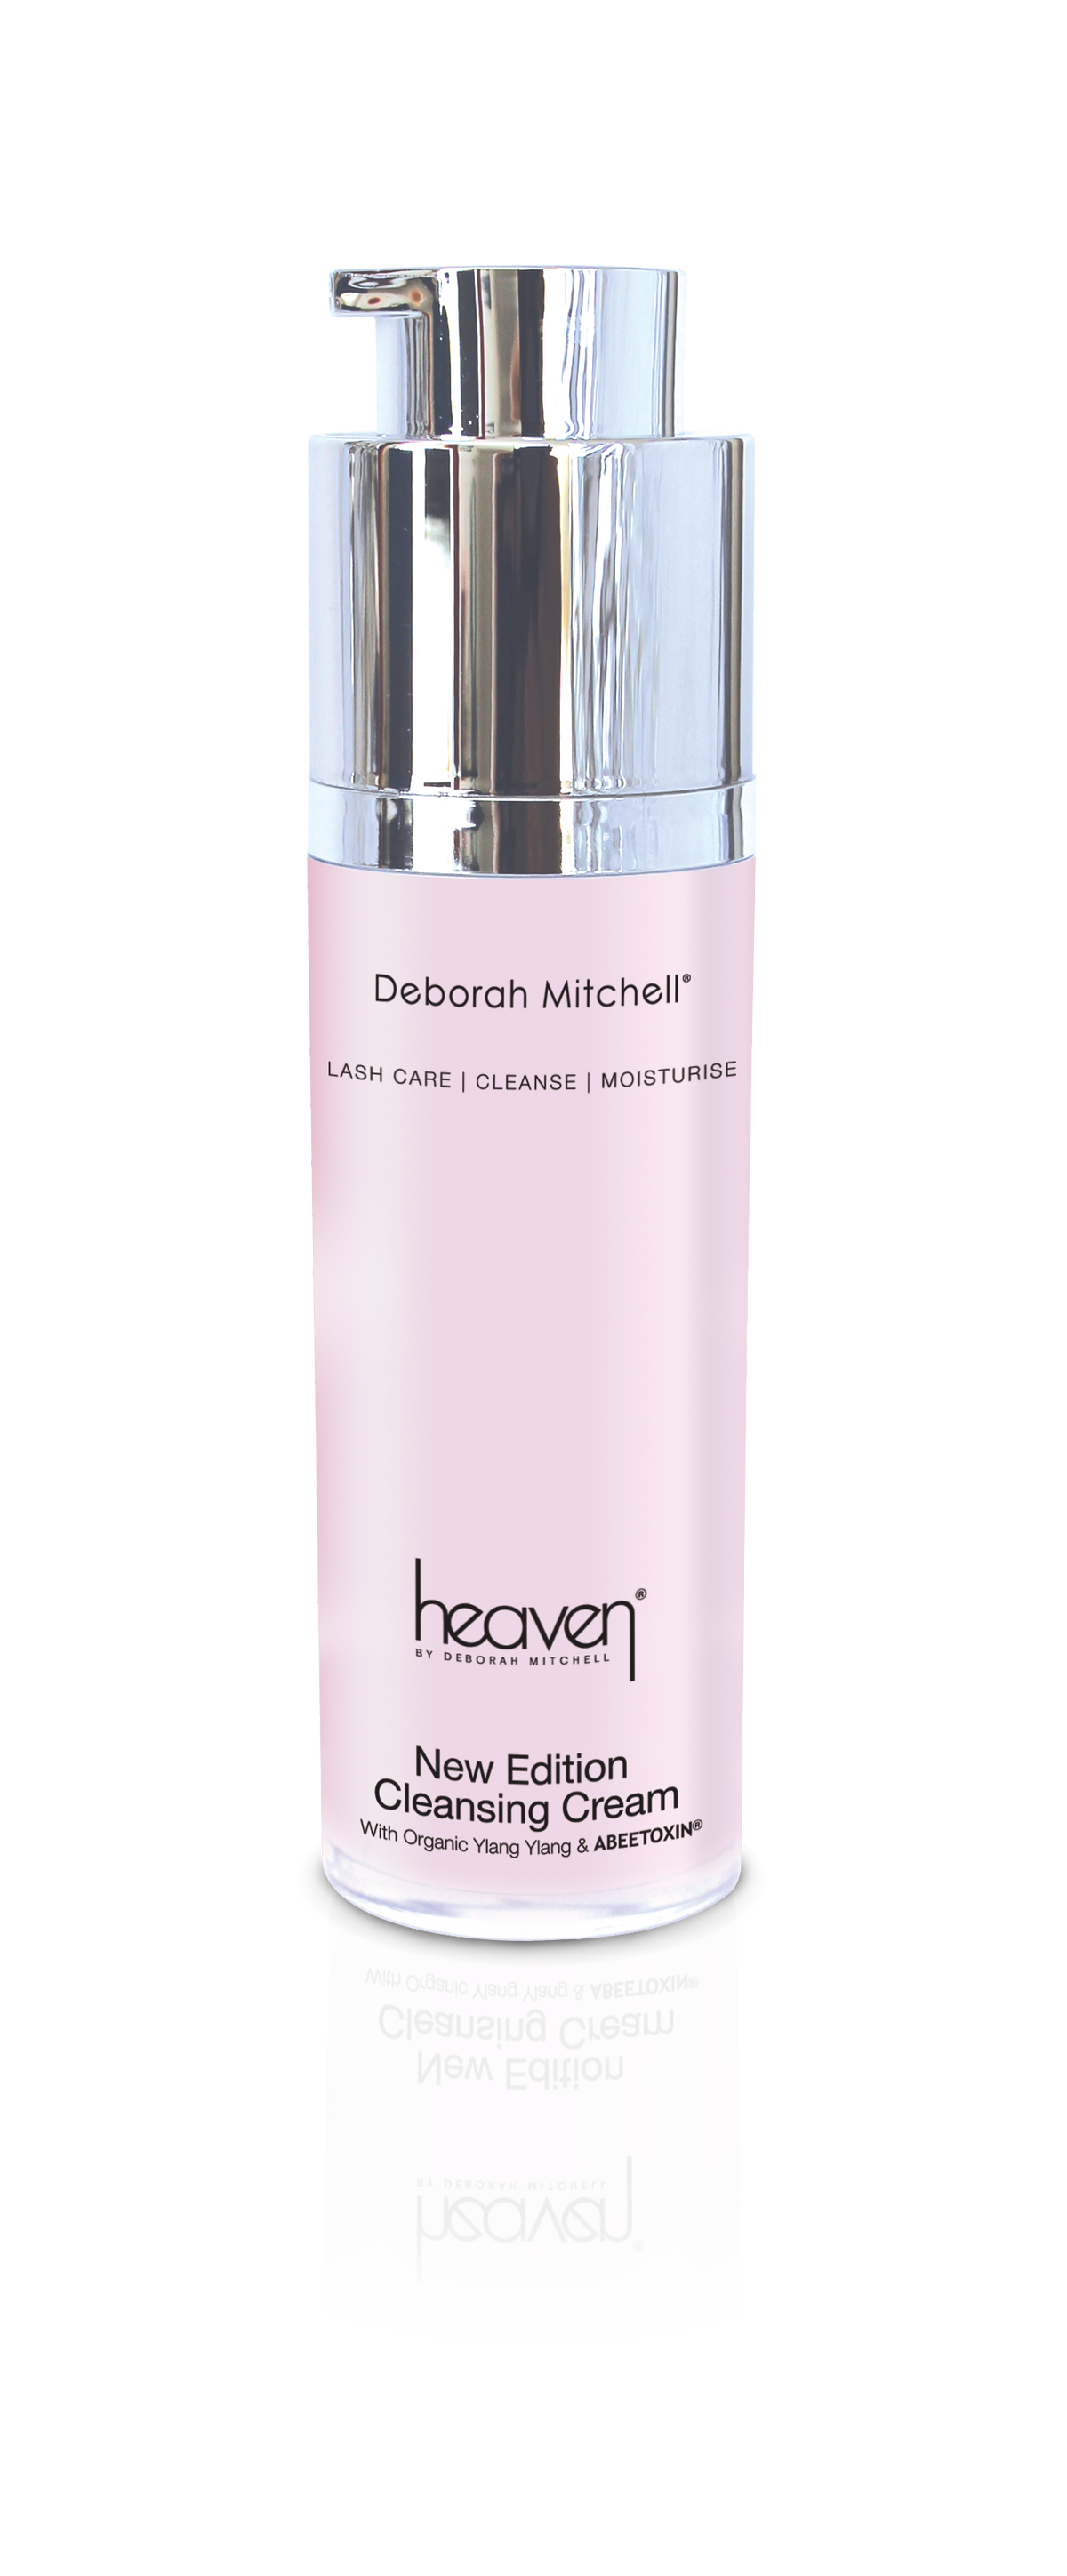 Heaven 蜂漾潔顏乳 New Edition Cleansing Cream